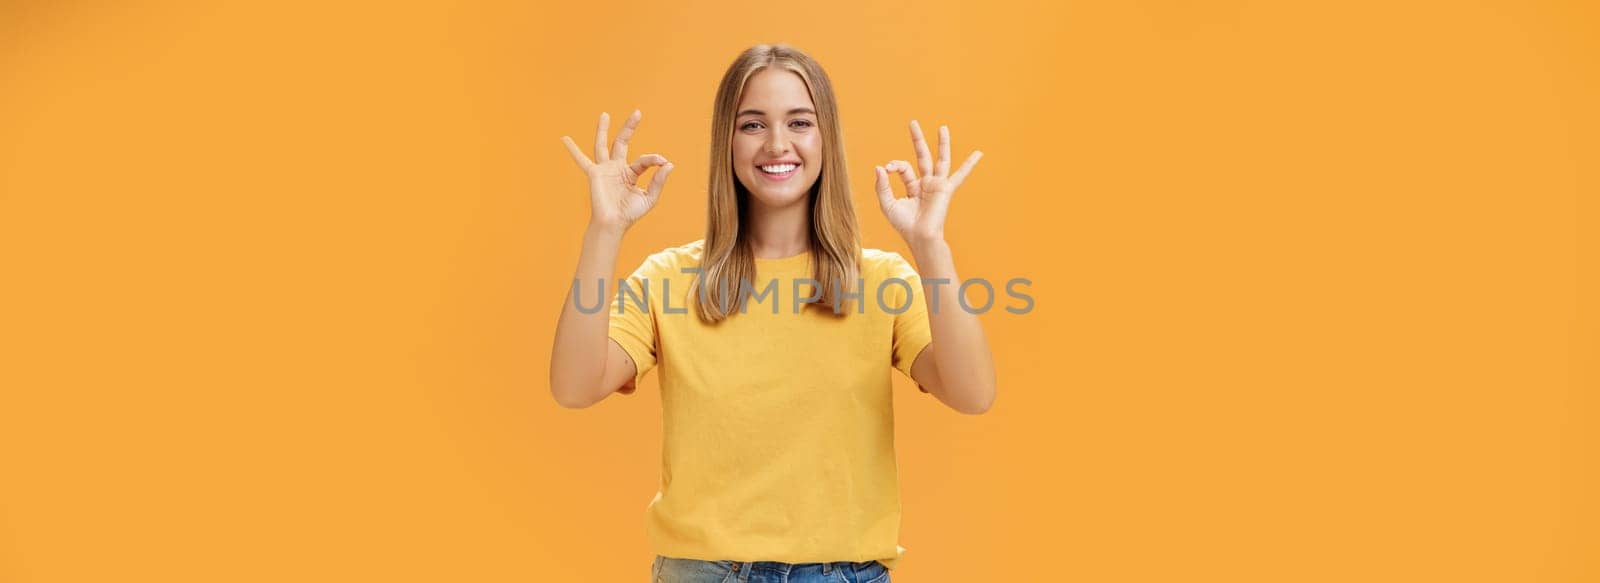 Optimistic charming woman with fair hair and no make-up in yellow t-shirt showing okay or approval gesture assuring everything ok and nothing to worry she can handle project alone, smiling confident. Emotions and body language concept